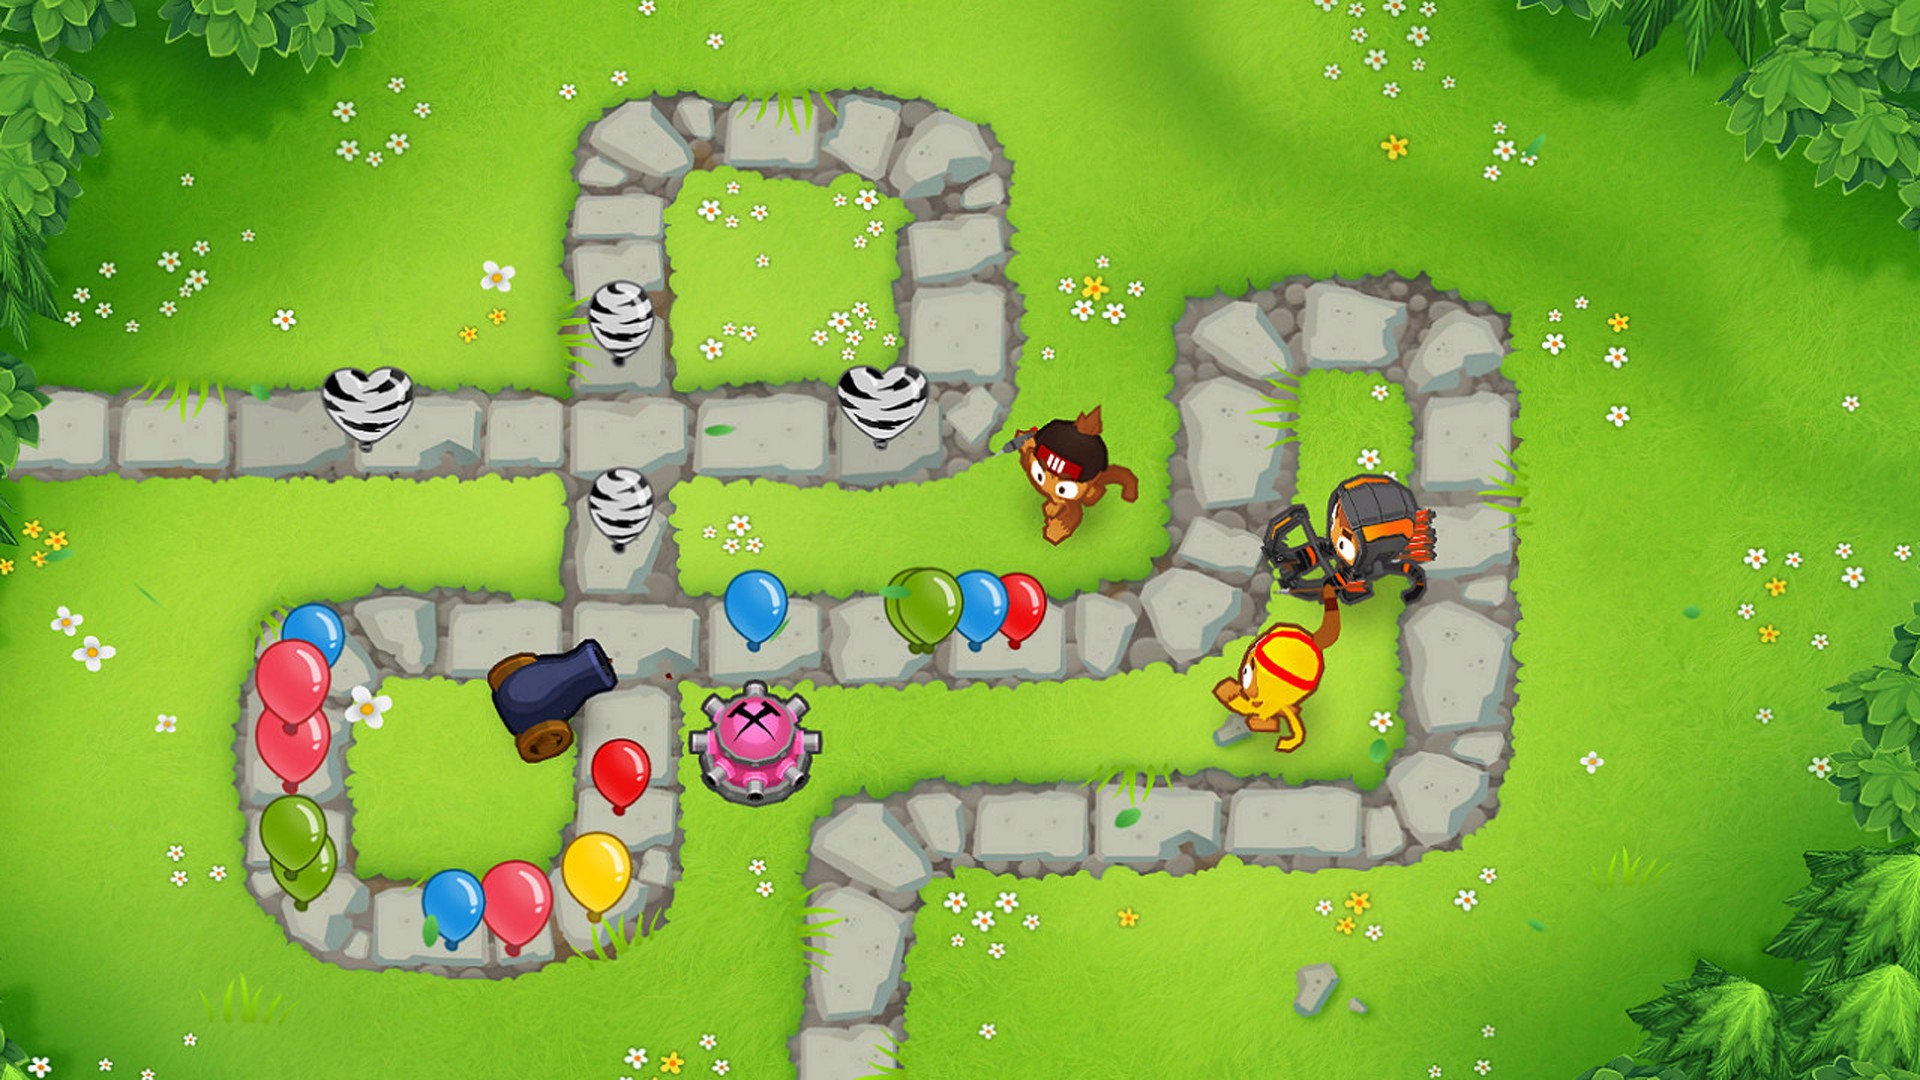 Best Tower Defense Game: Balloons travel along stone paths in grass to open turrets in Bloons 6.